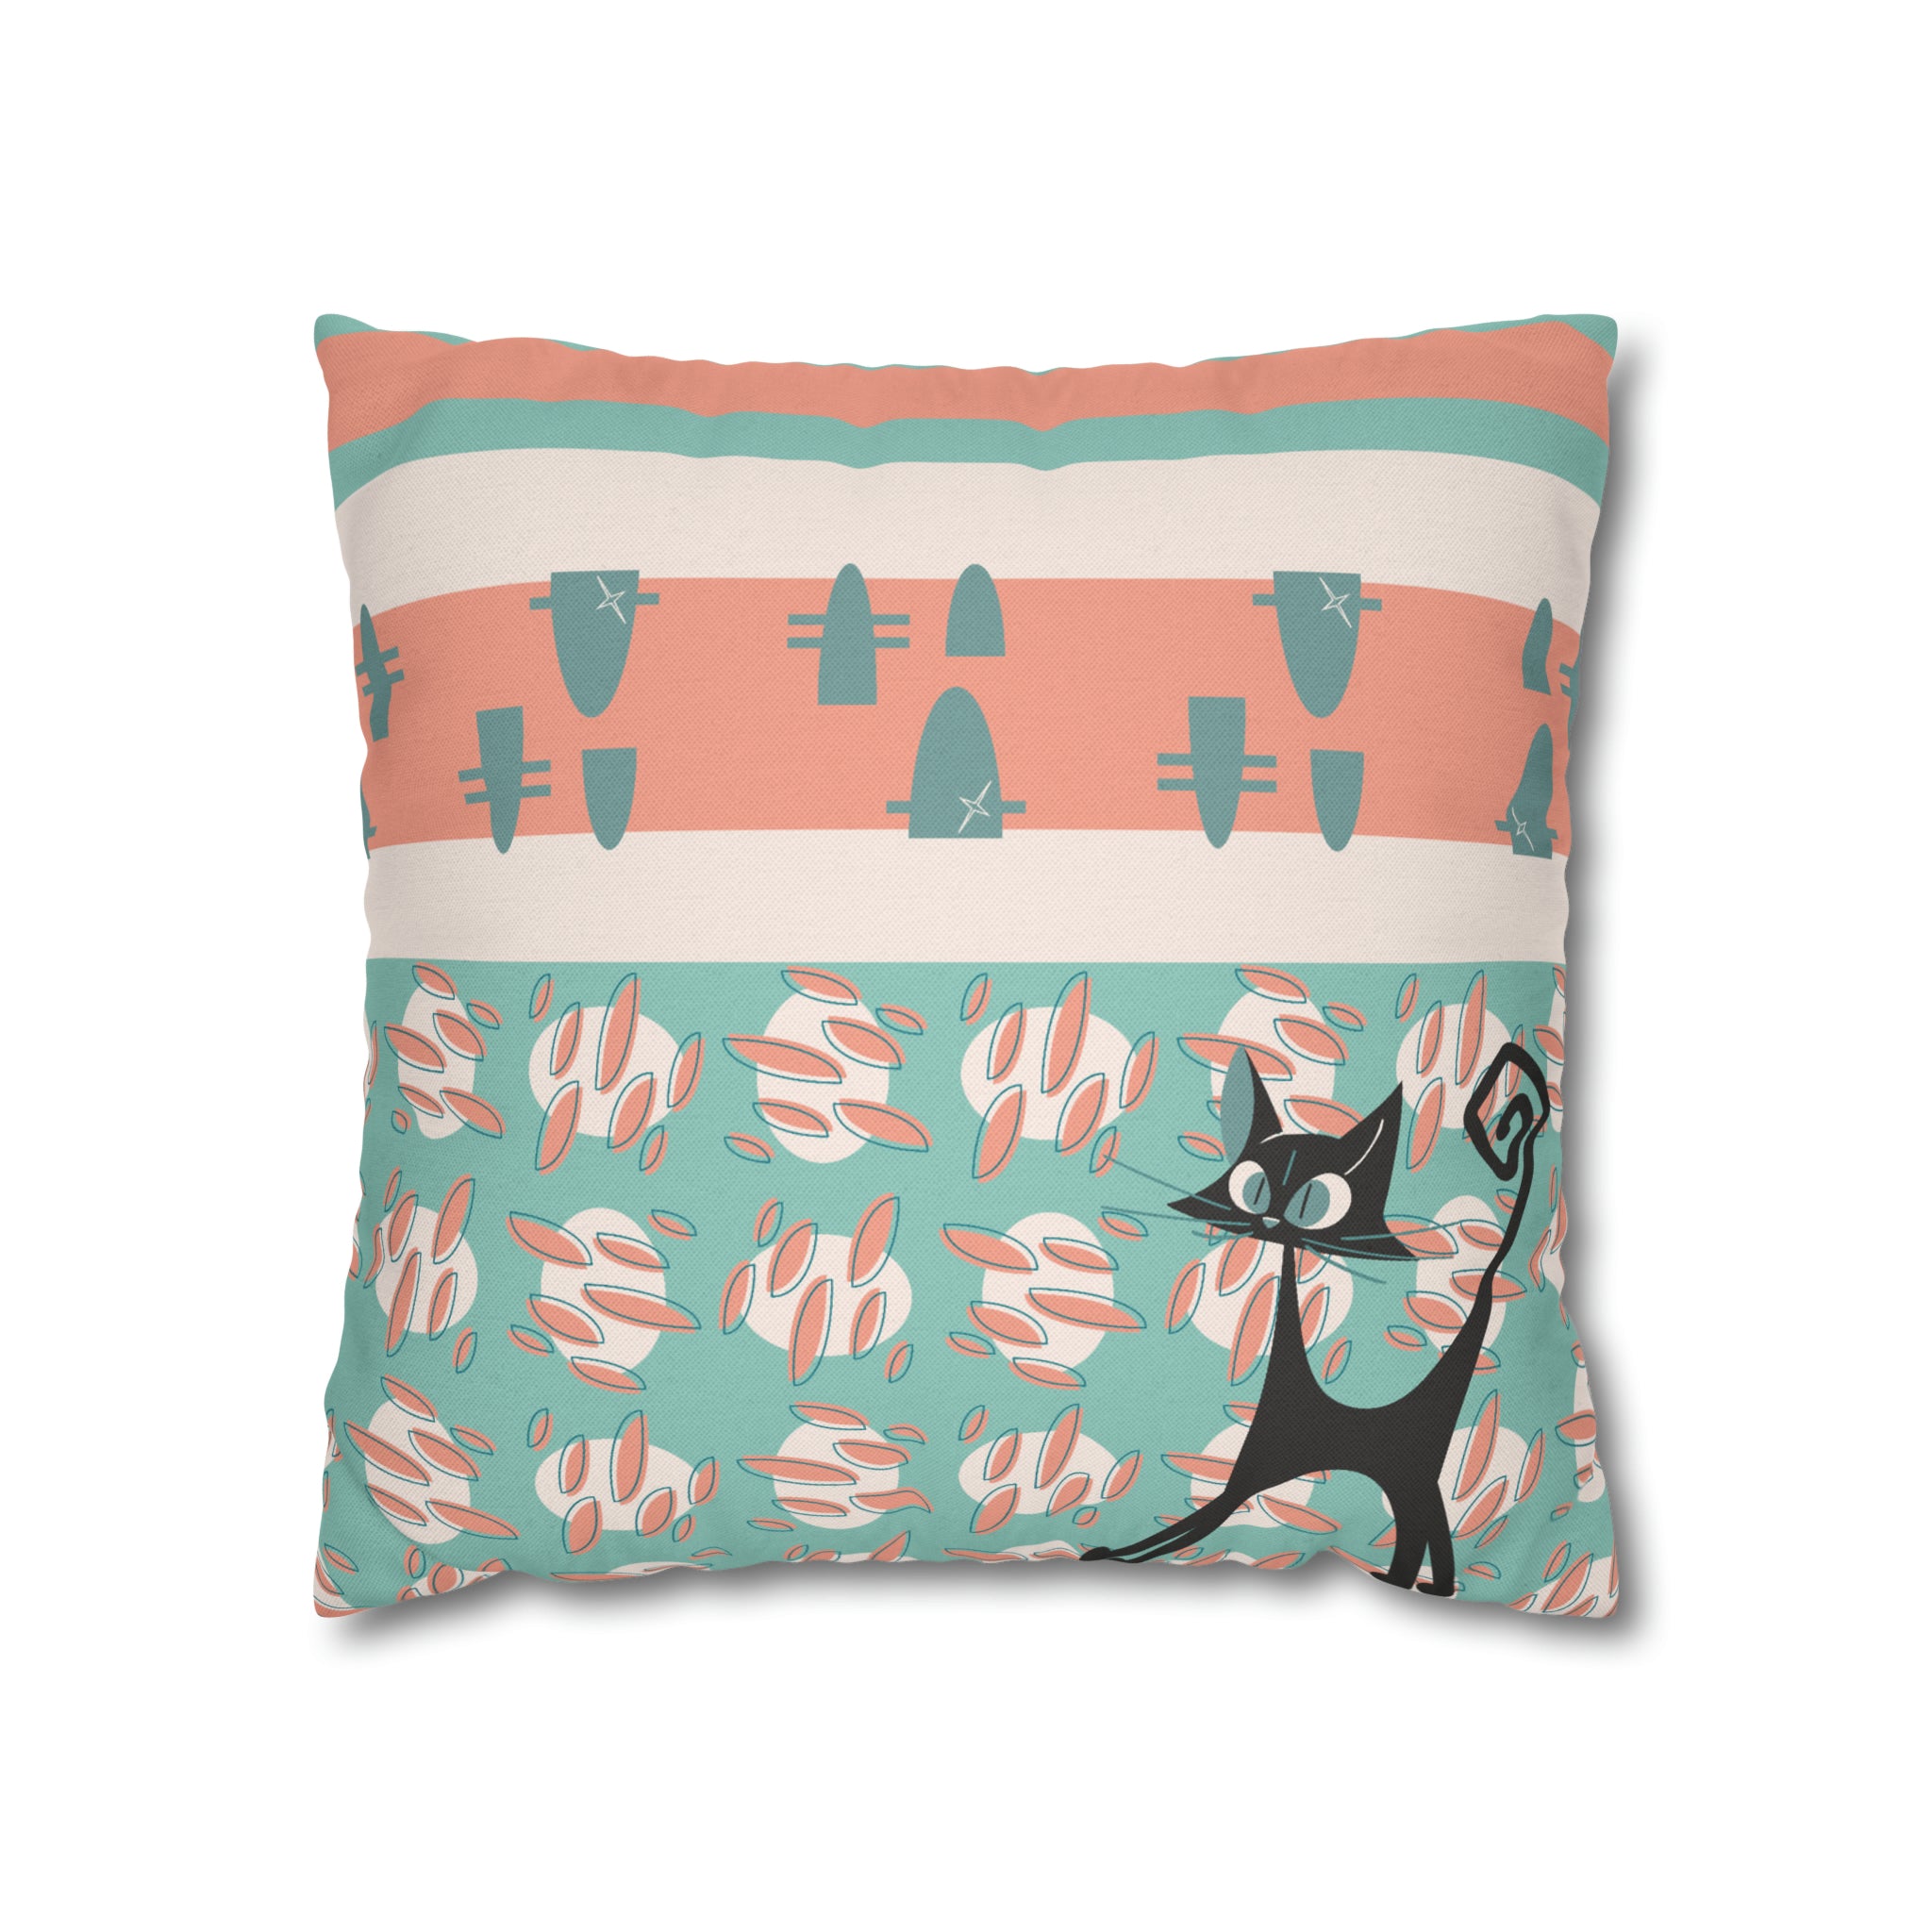 50s Nostalgic Atomic Cat Mid Century Modern Aqua, Coral Pink Peach, Kitschy Mid Century Modern Pillow Cover ONLY